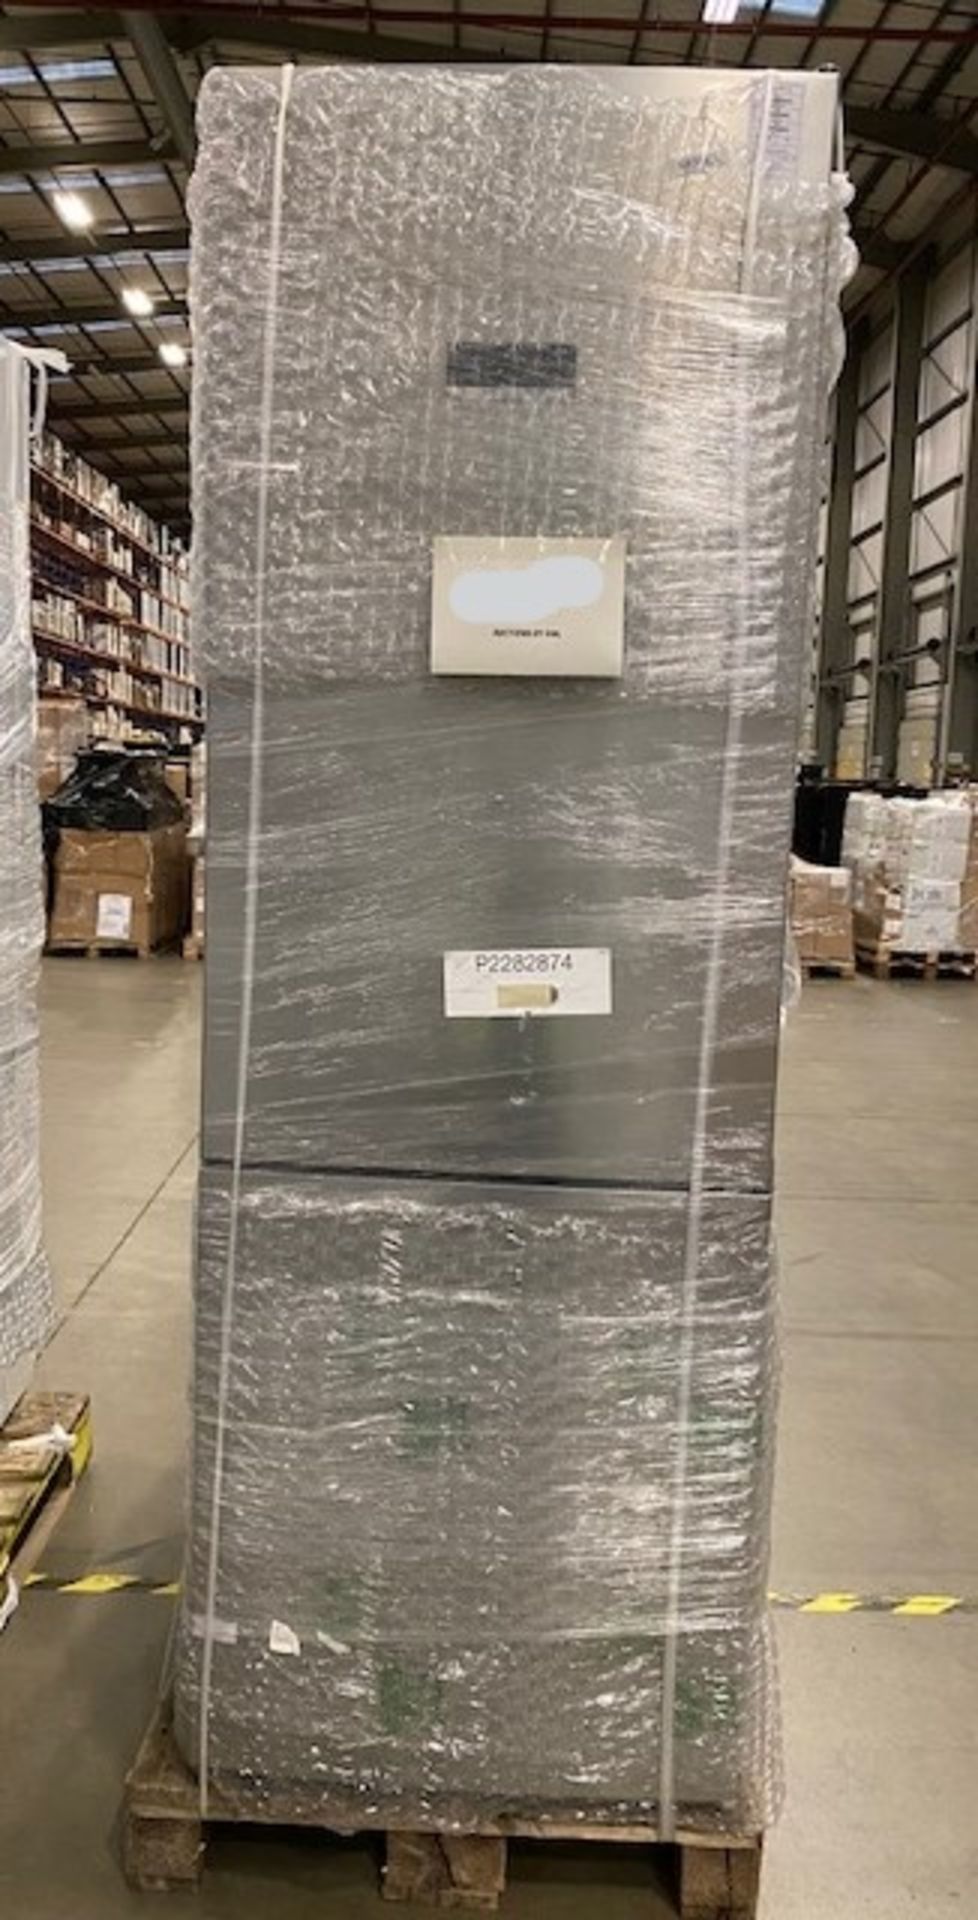 Pallet of Mixed Bosch White Goods. Latest selling price £1049.96